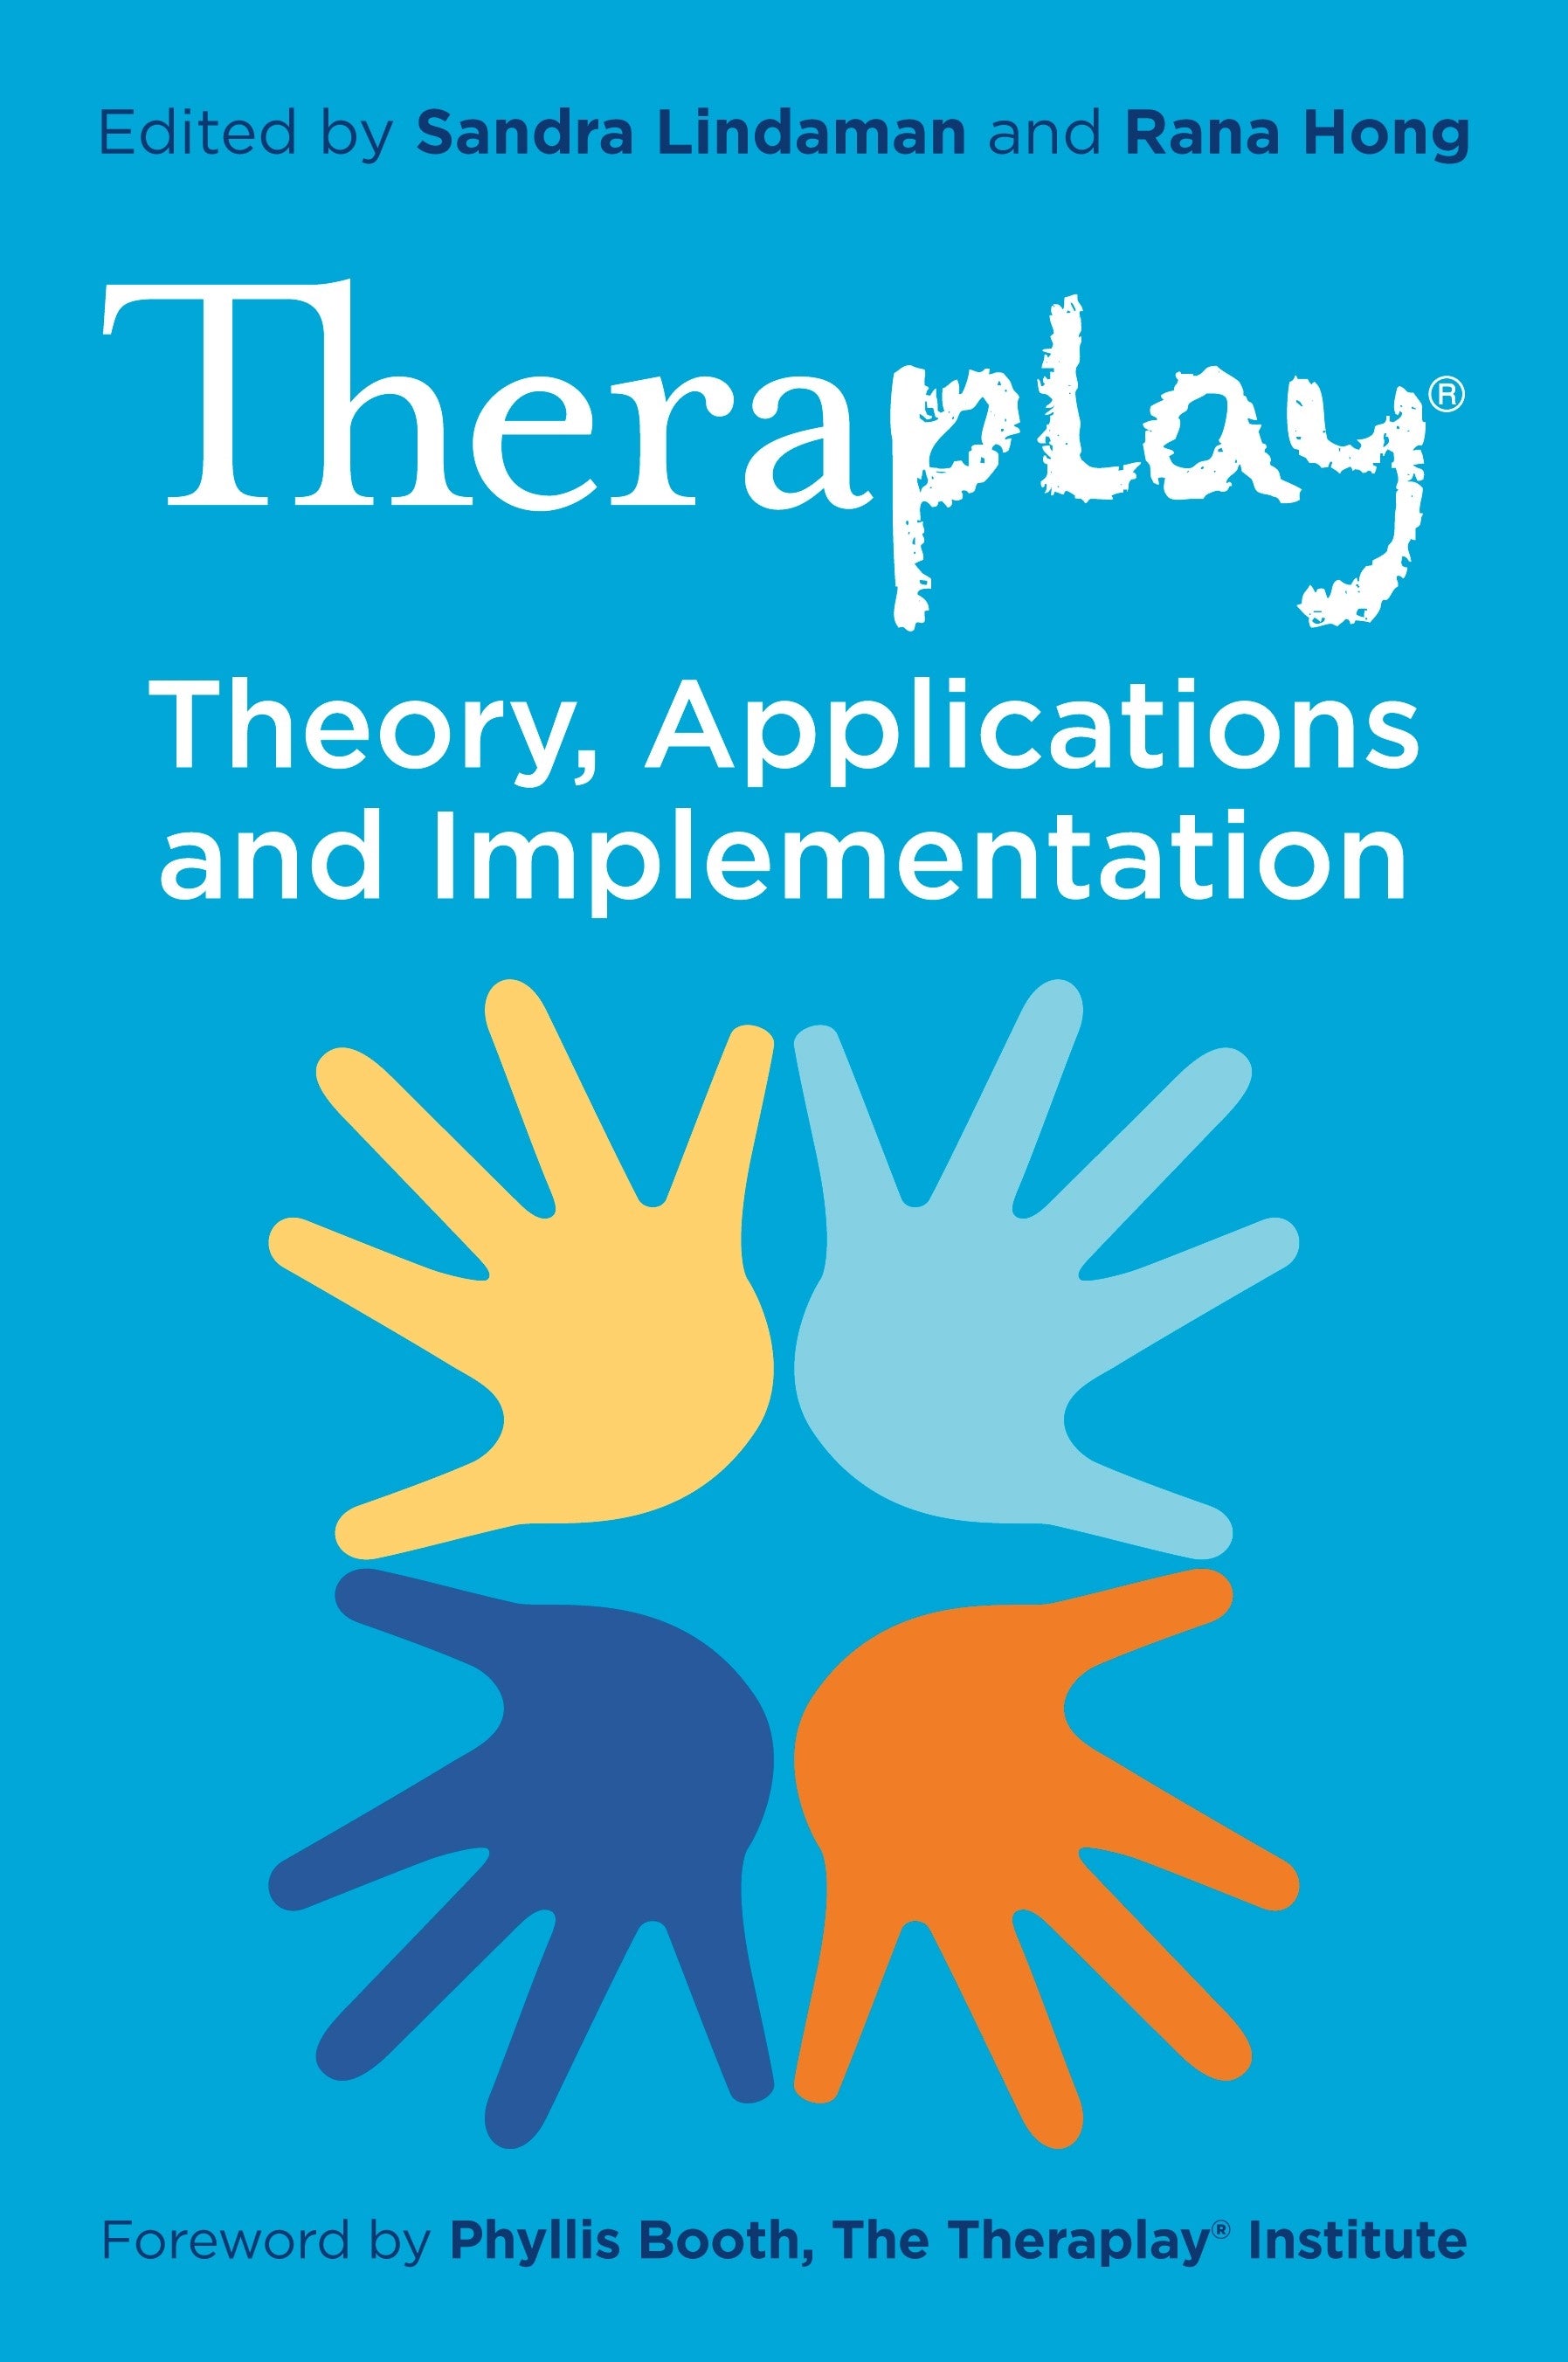 Theraplay® – Theory, Applications and Implementation by Phyllis Booth, Rana Hong, Sandra Lindaman, No Author Listed